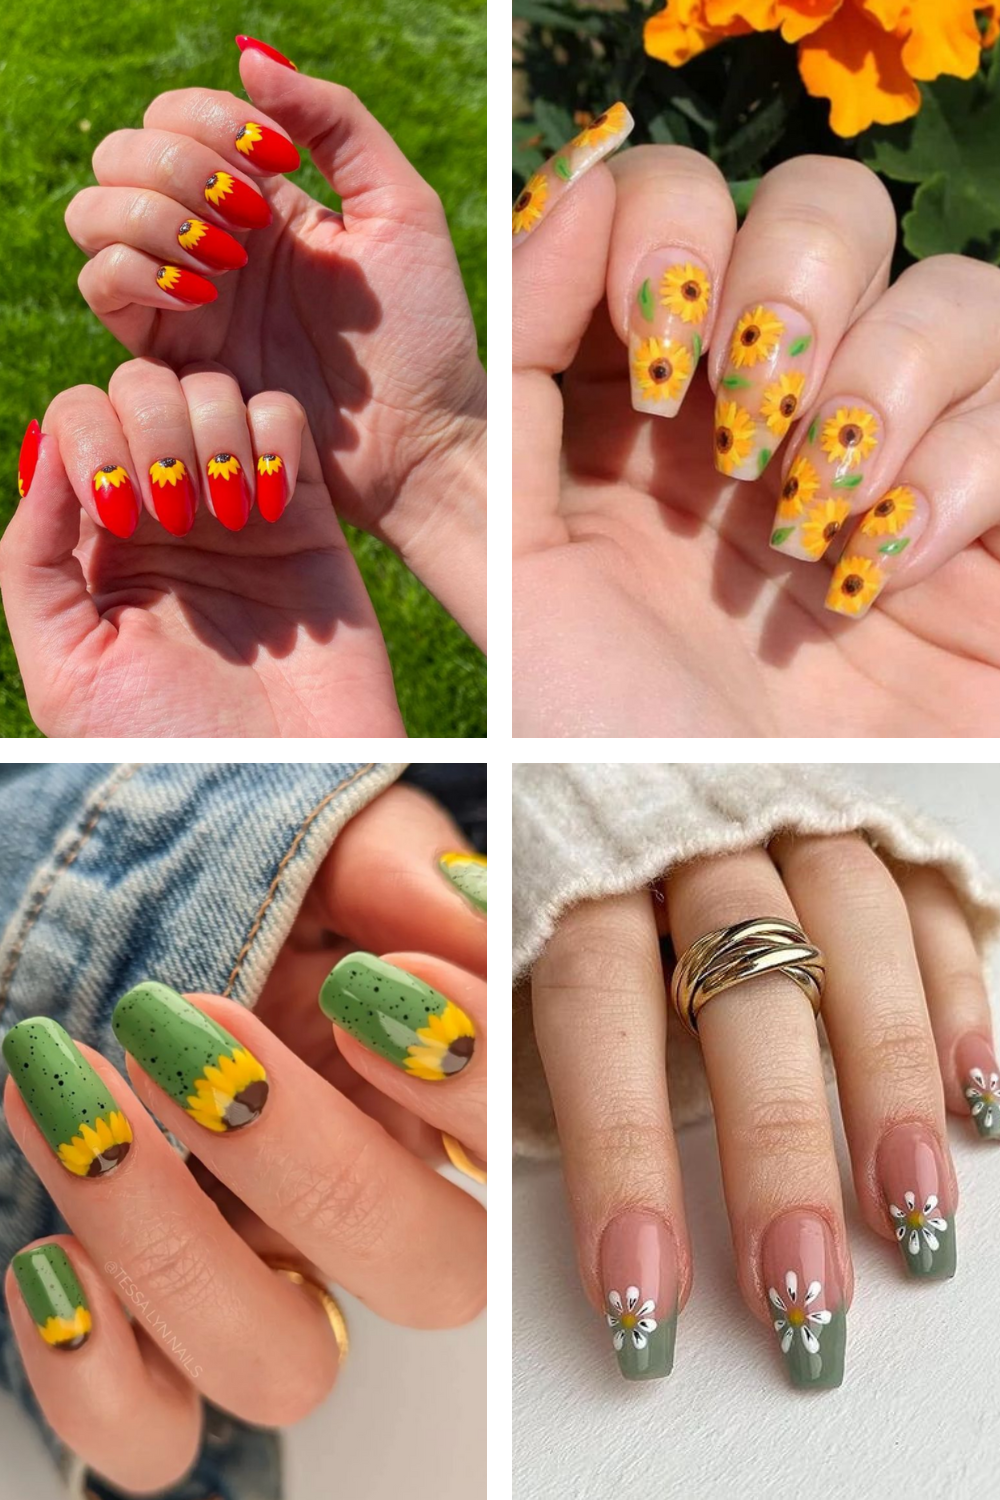 43 Swoonworthy Summer Flower Nails to Fall in Love With!